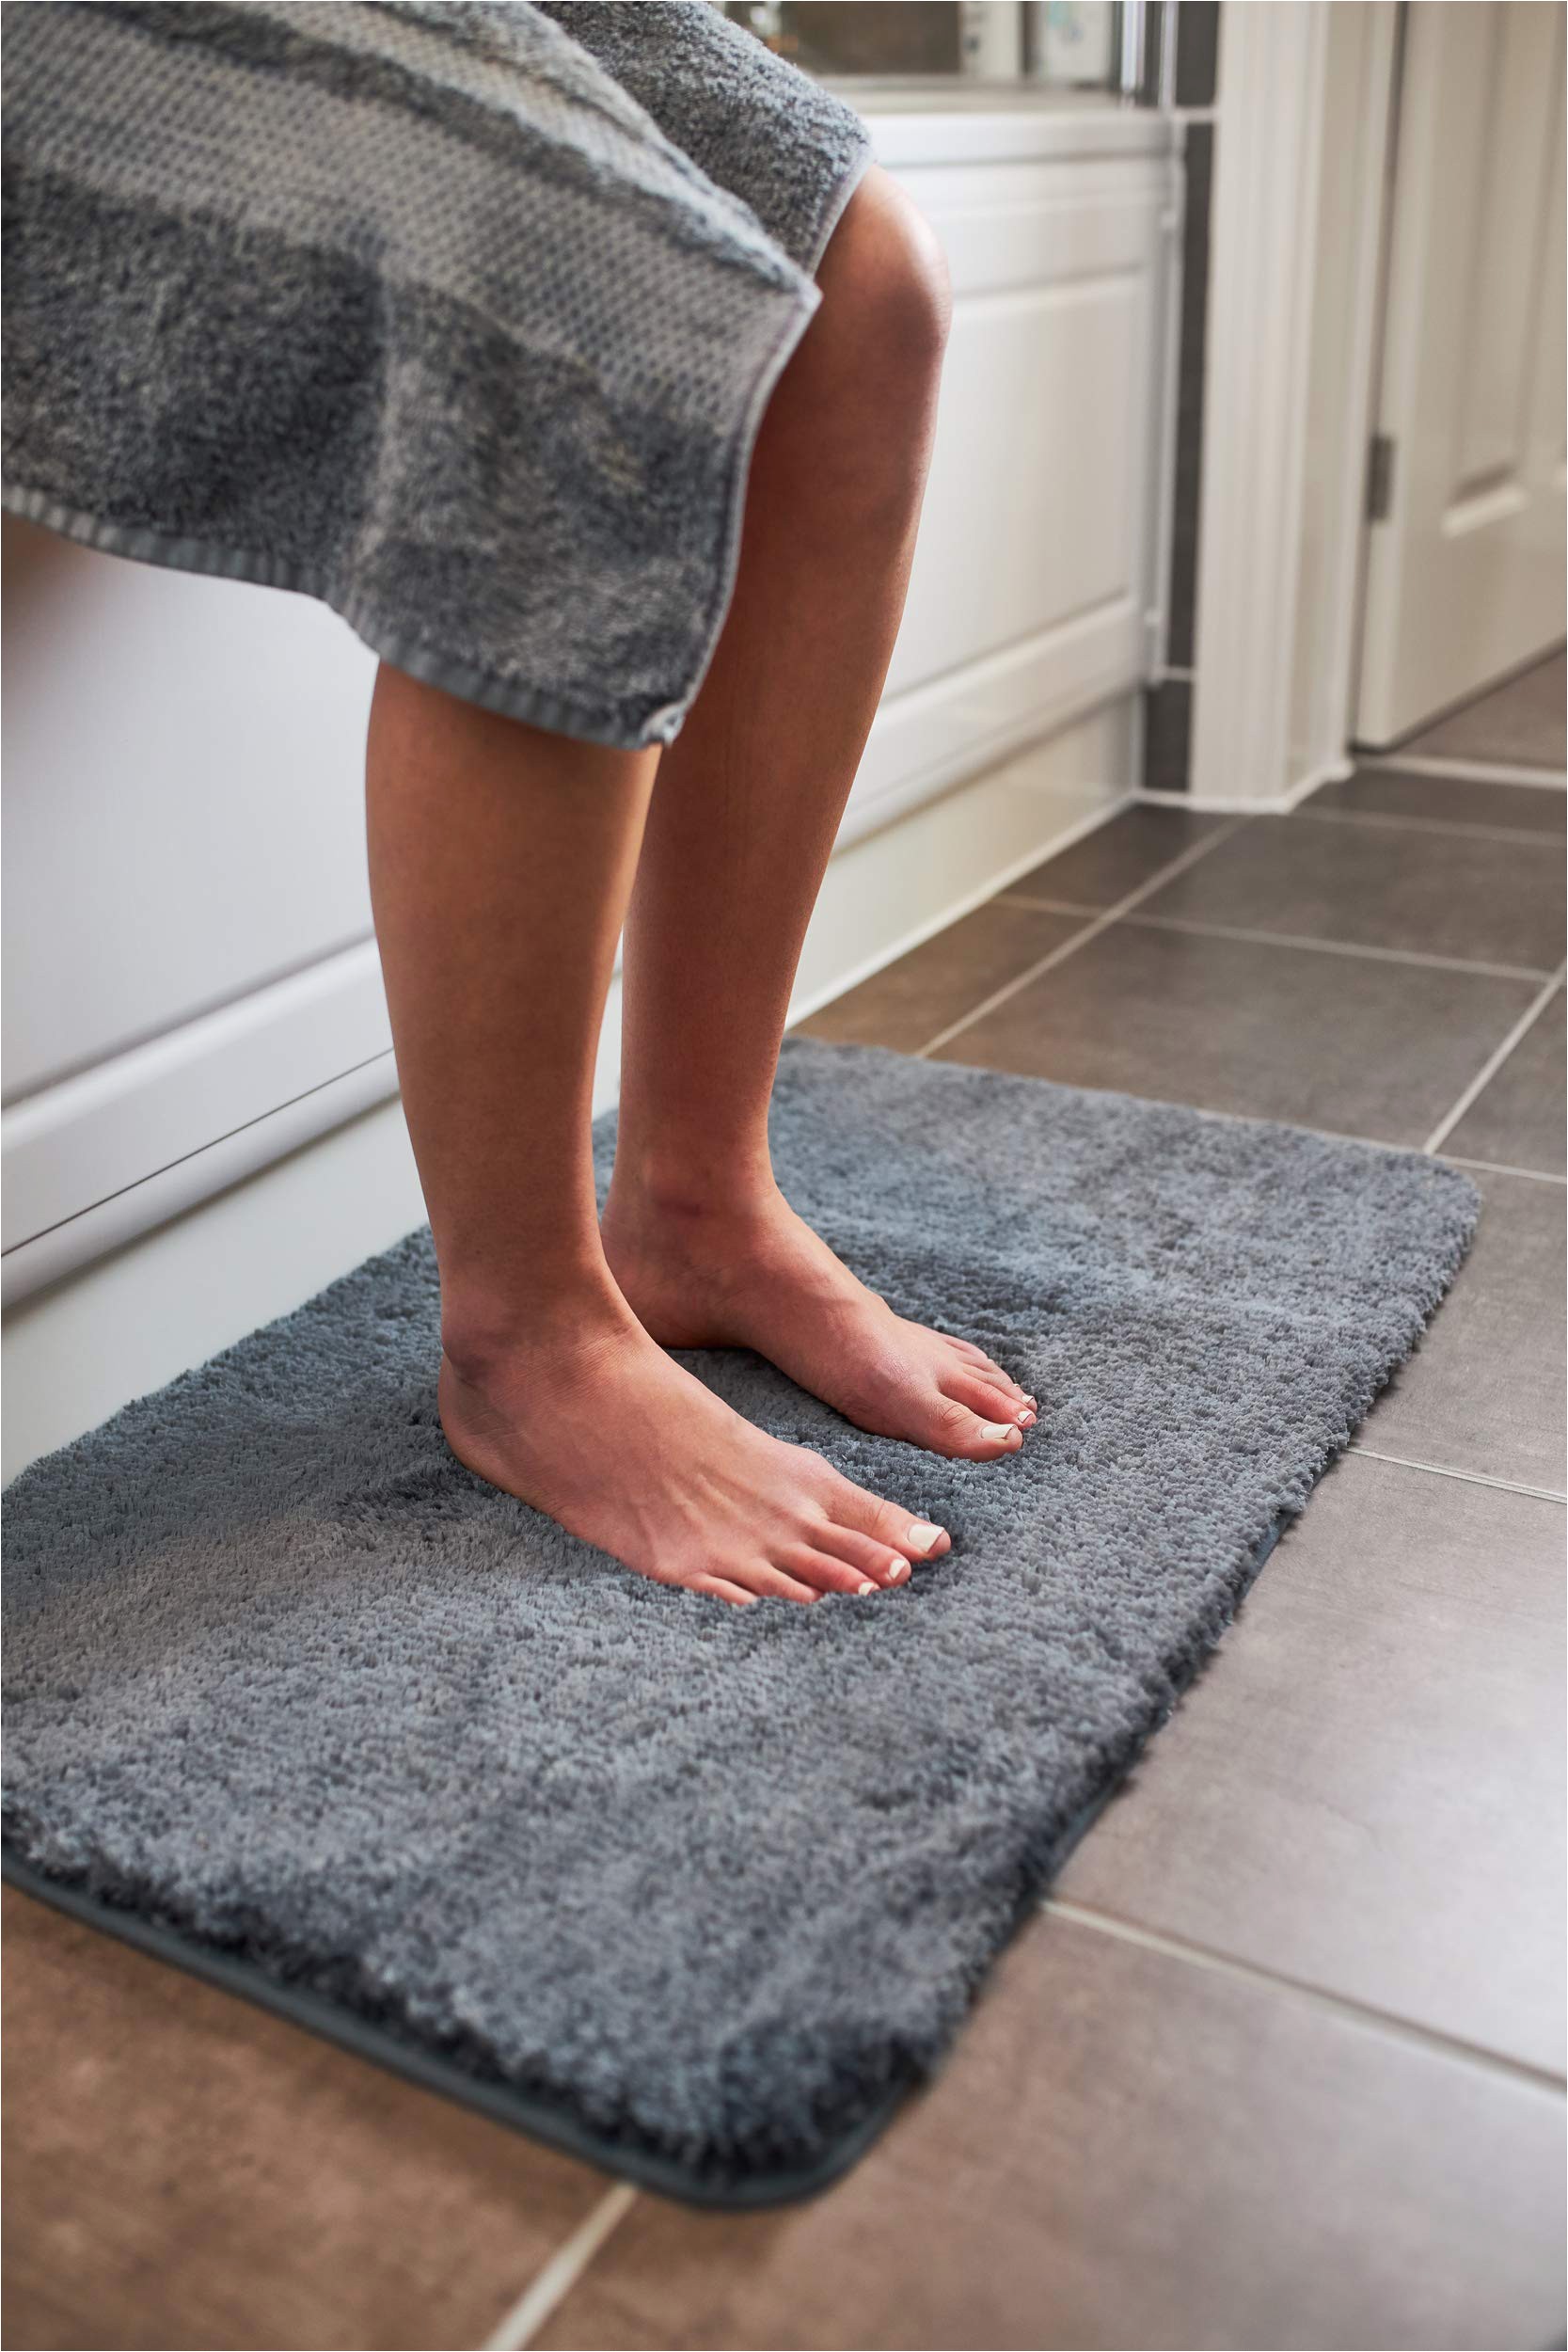 Charcoal Grey Bathroom Rugs Luxury Grey Bath Mat Microfiber Non Slip Bath Rug with Super soft Absorbent Dry Fast Design for Bath and Shower